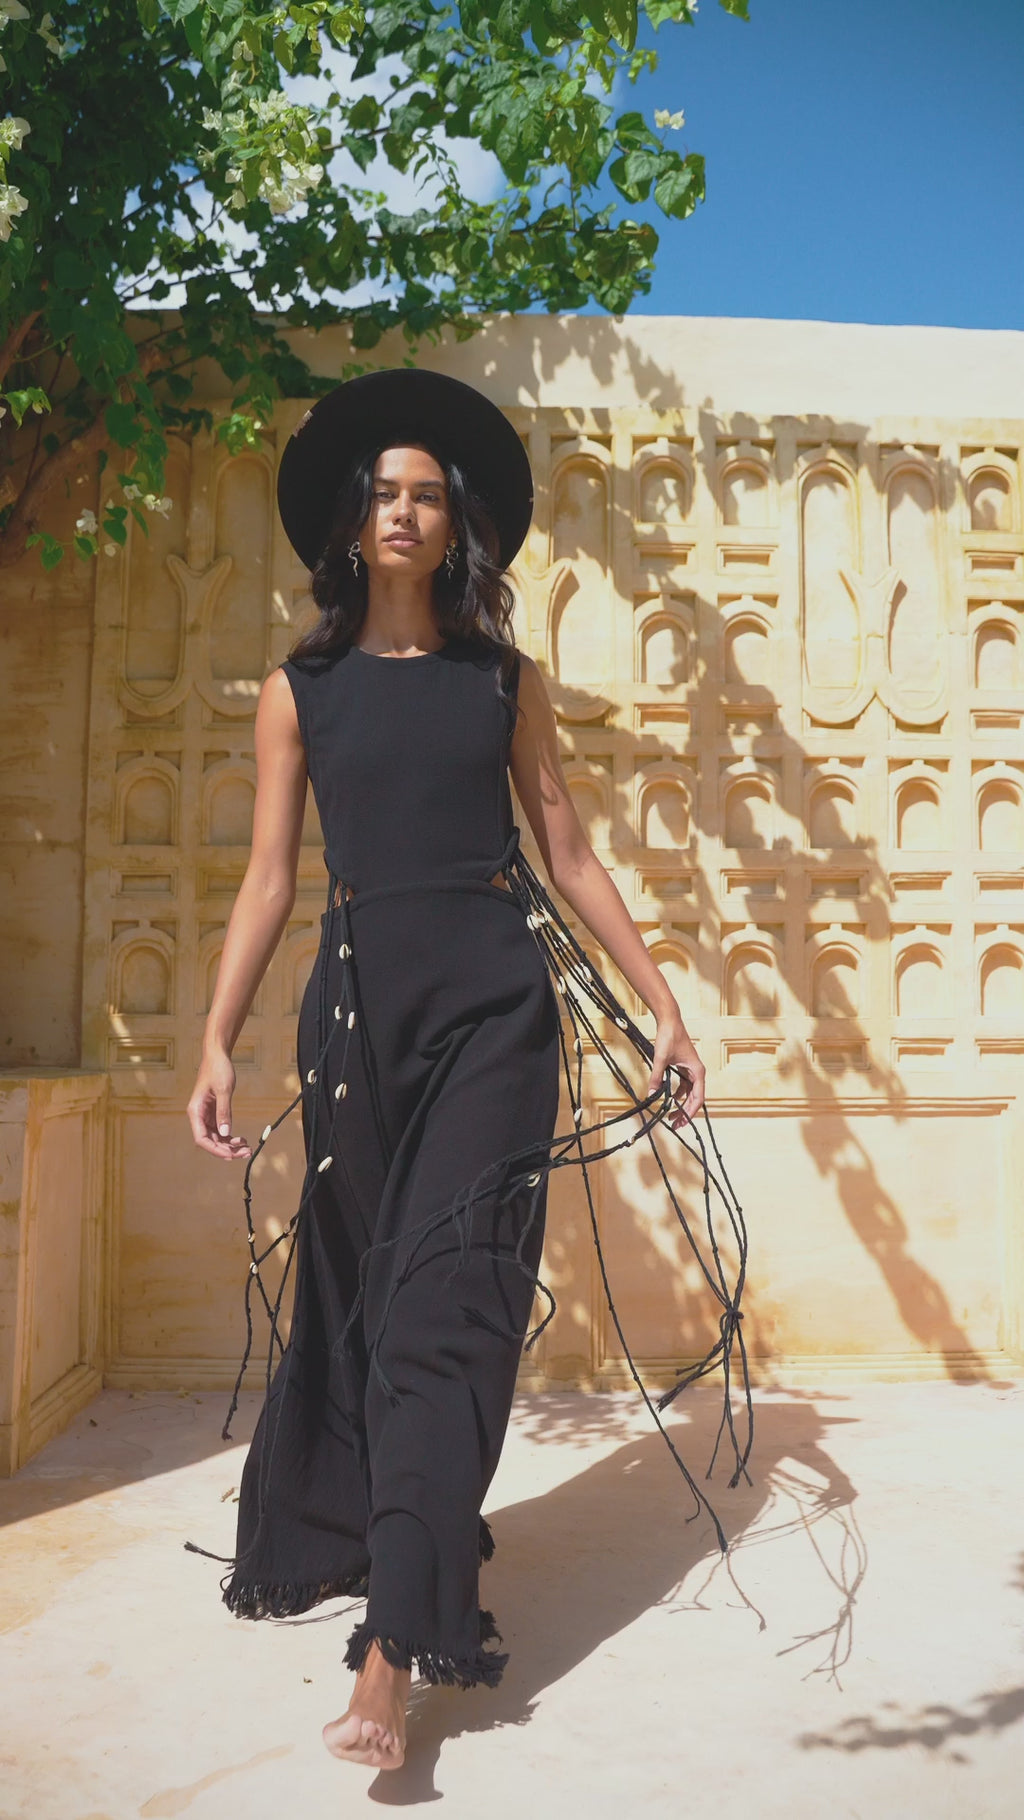 Showcase of Organic Casual Dress in A-Line cut; Black Boho Goddess with Open Sides Macrame Robes, perfect for cocktails and casual wear.